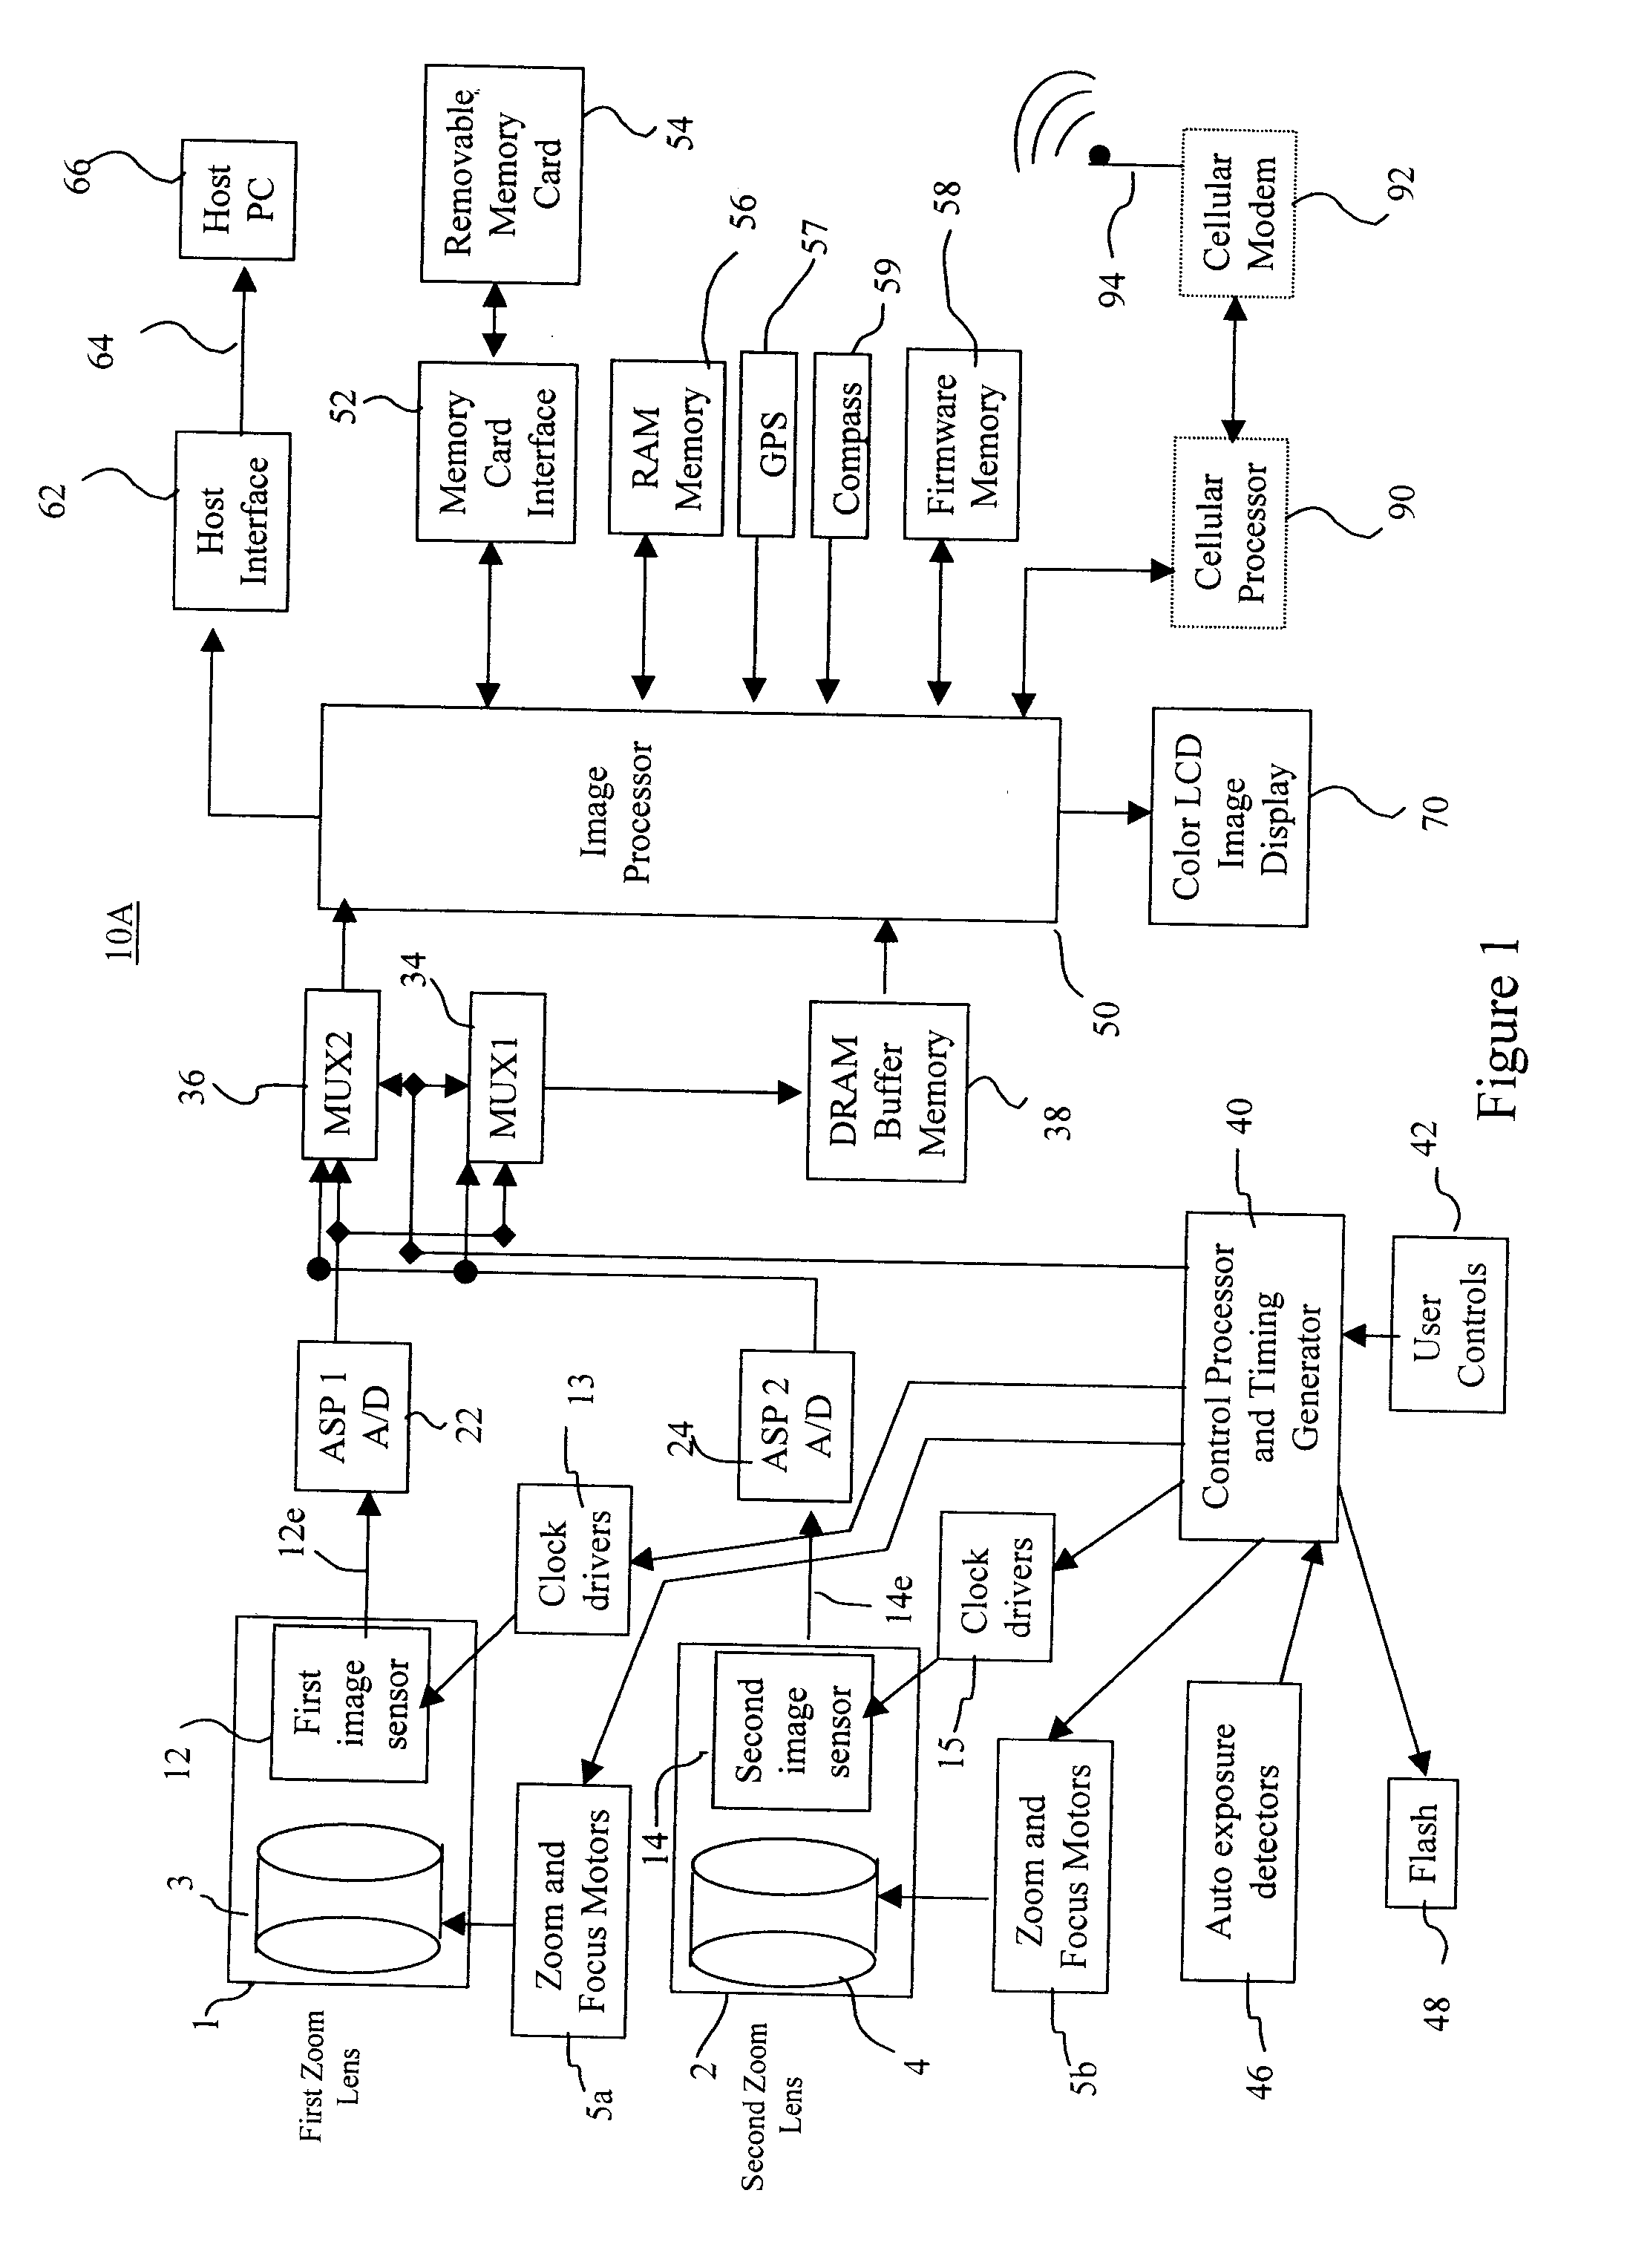 Camera using multiple lenses and image sensors in a rangefinder configuration to provide a range map